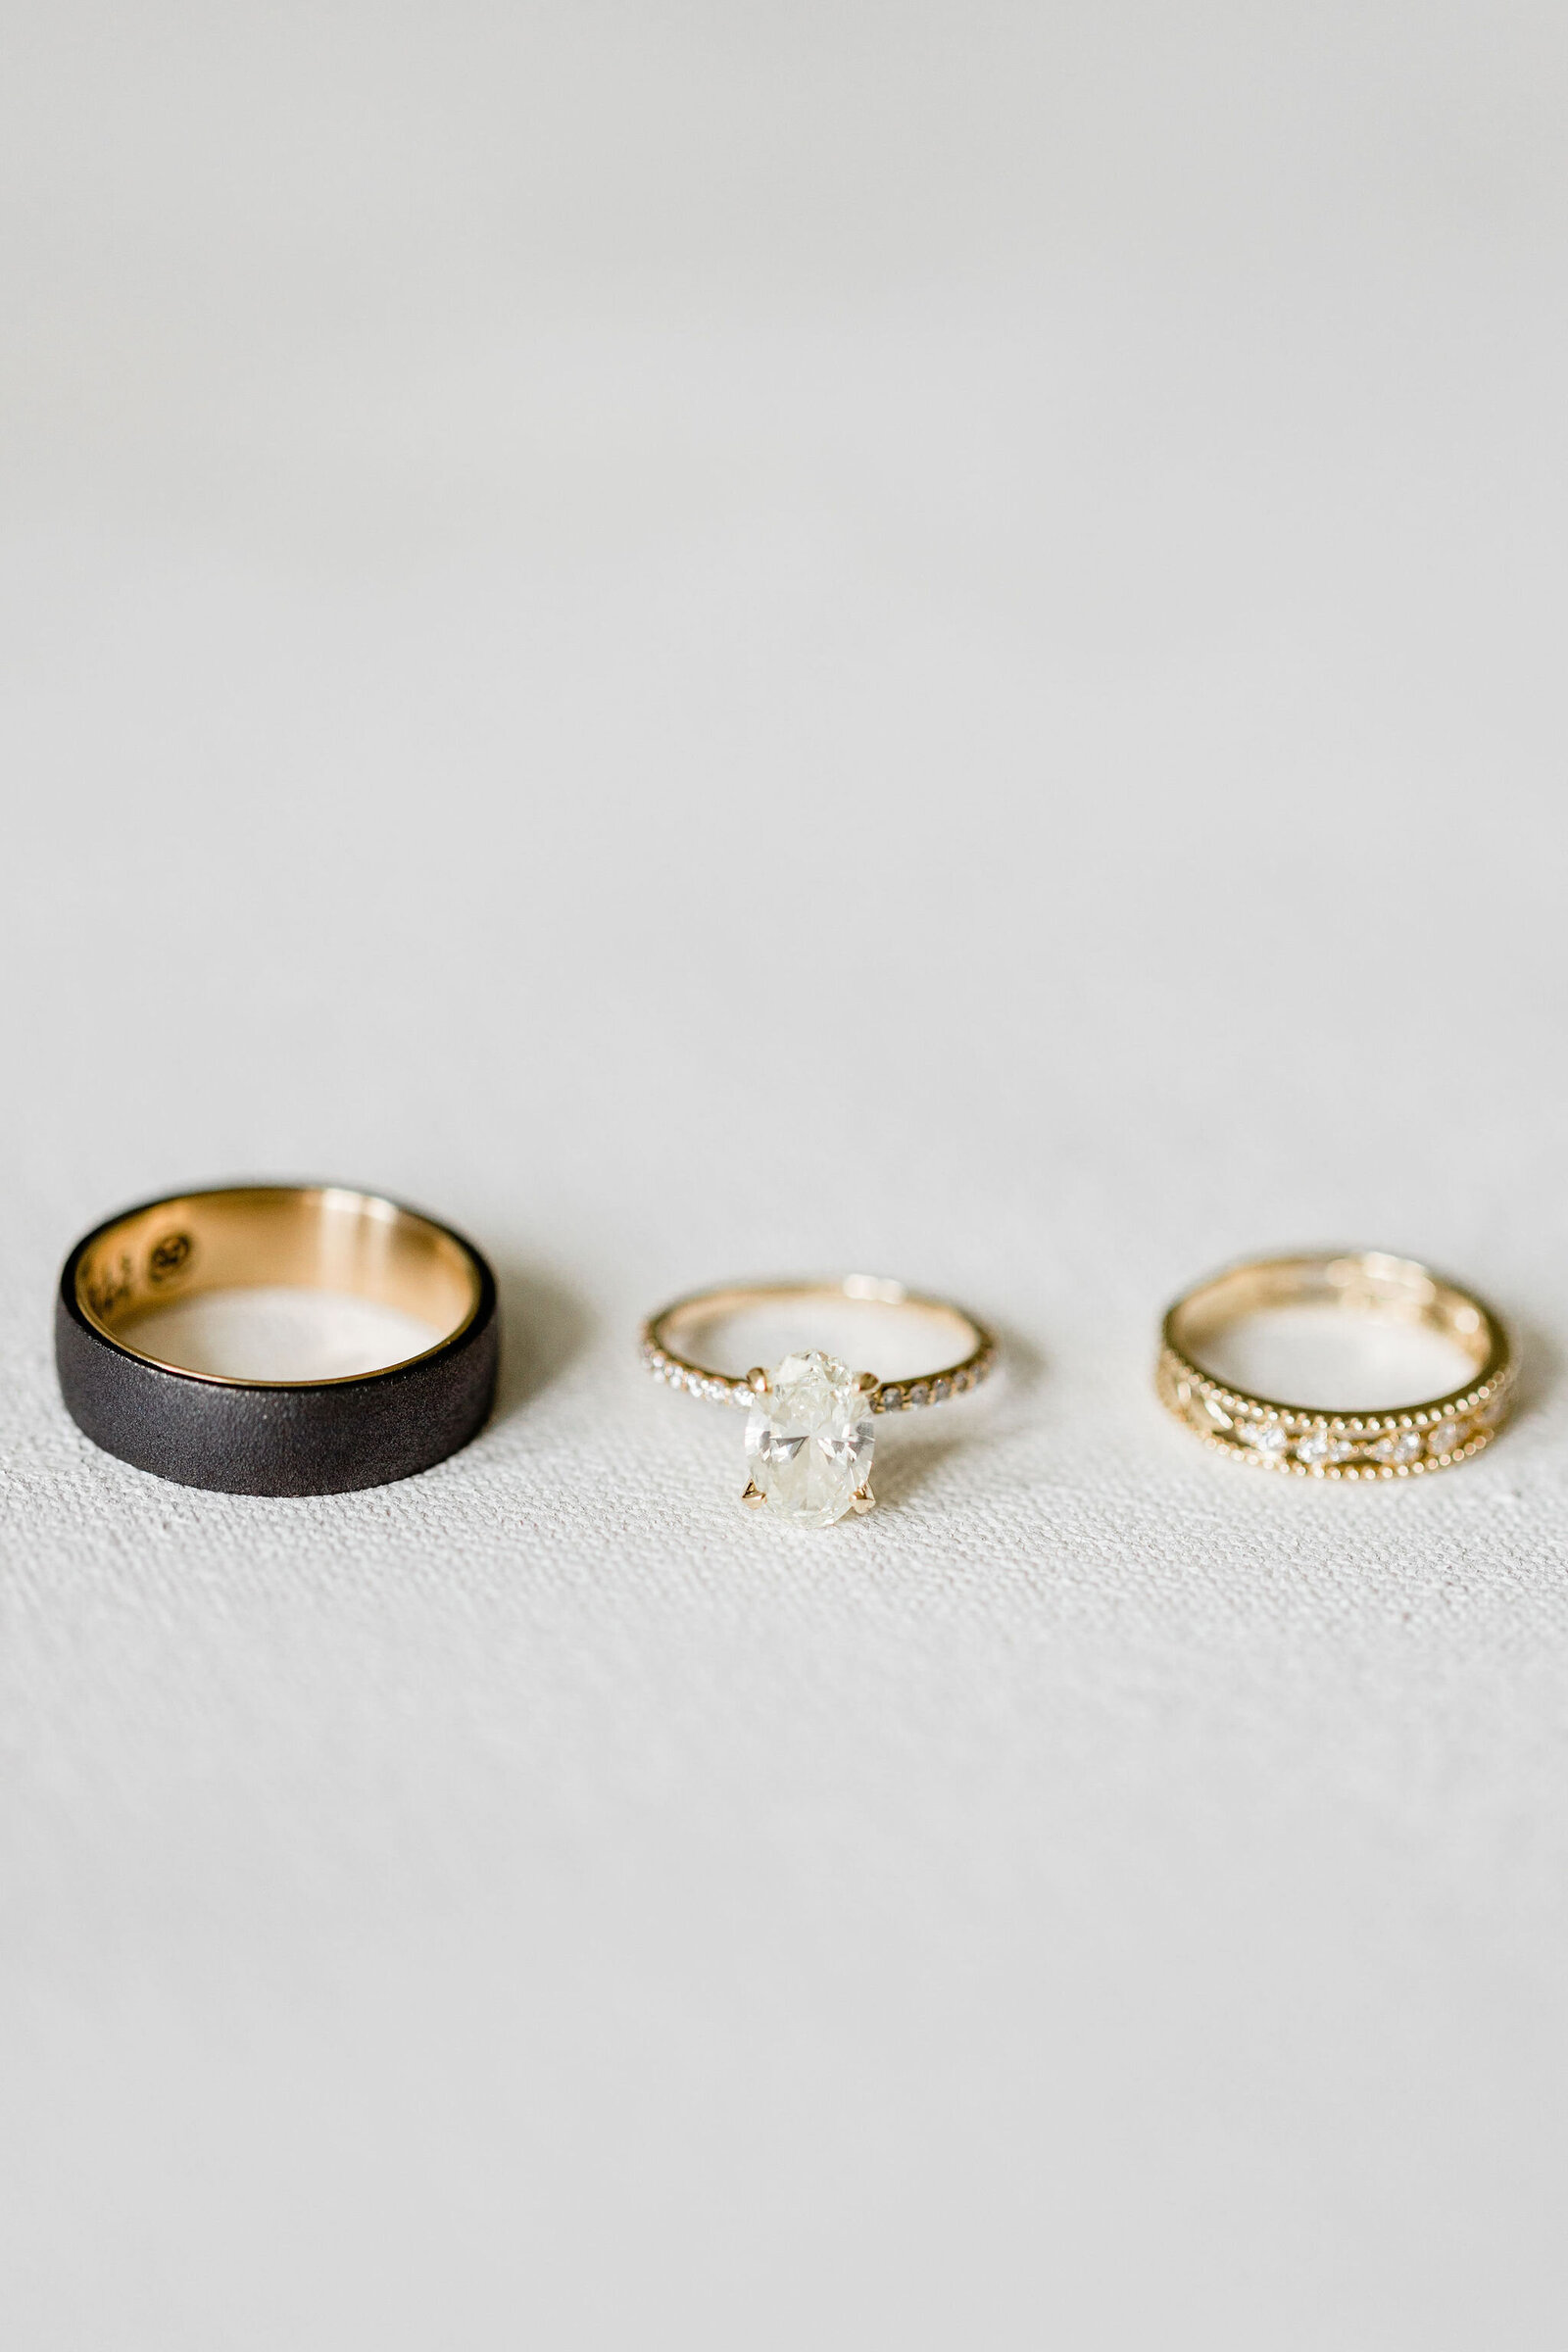 Wedding Ring Details | Raleigh NC | The Axtells Photo and Film